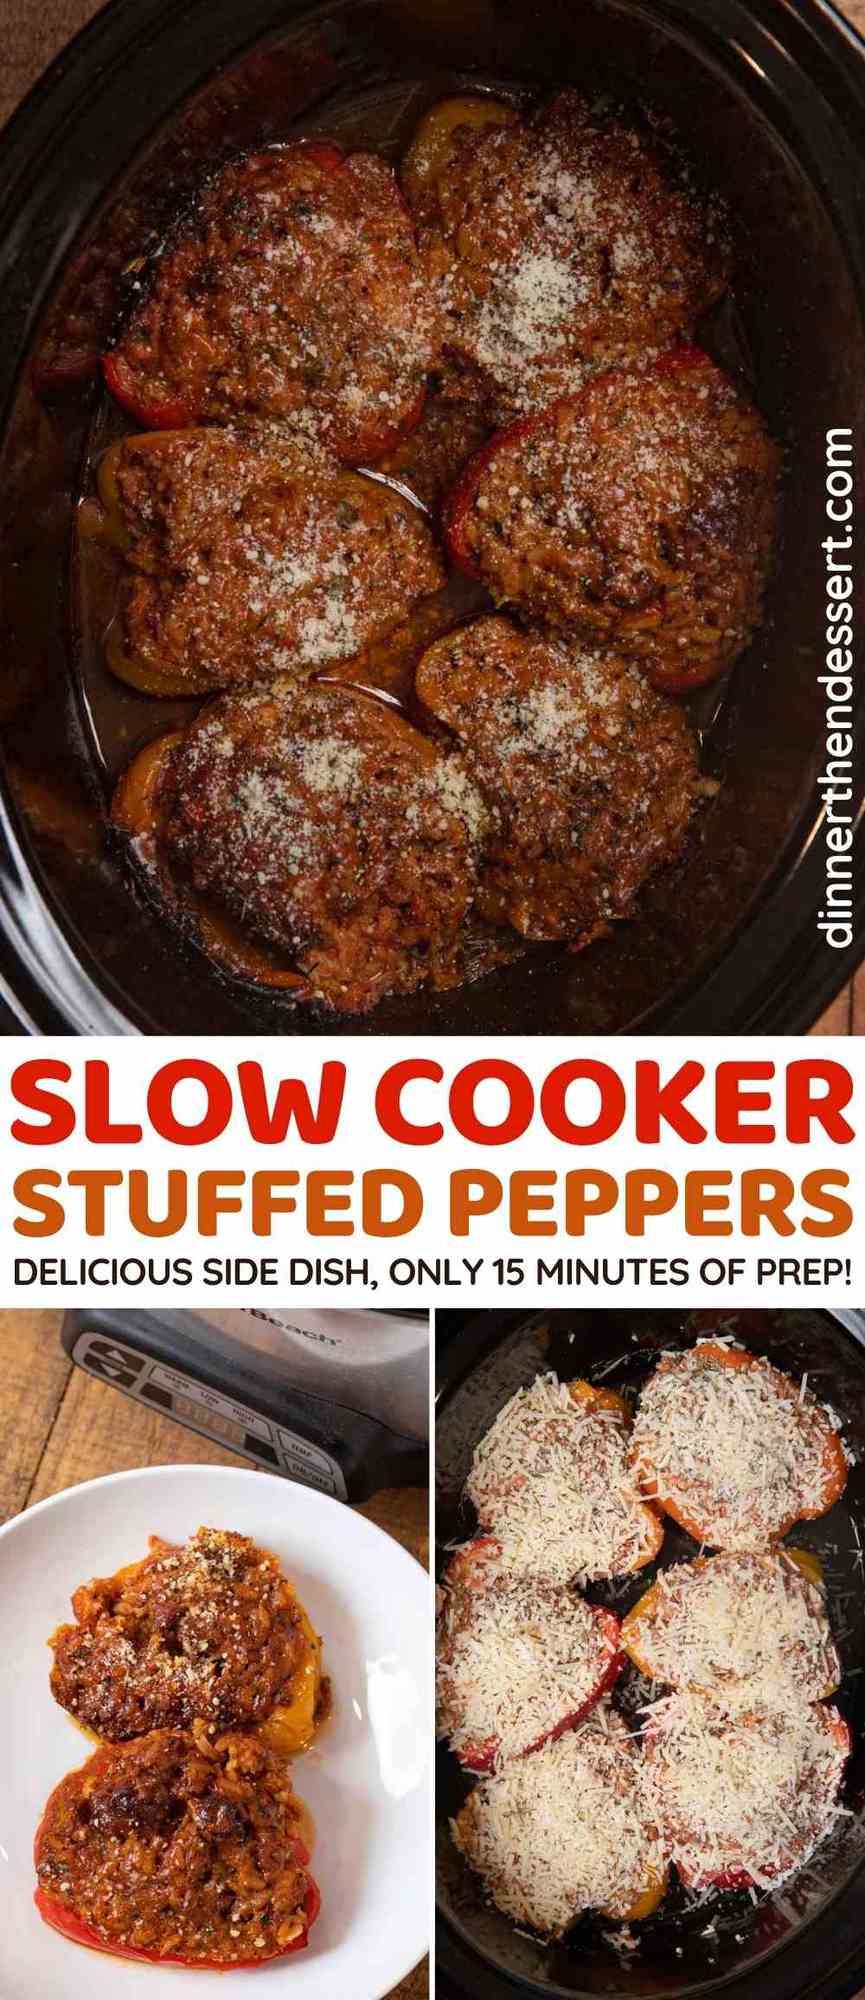 Slow Cooker Stuffed Peppers collage